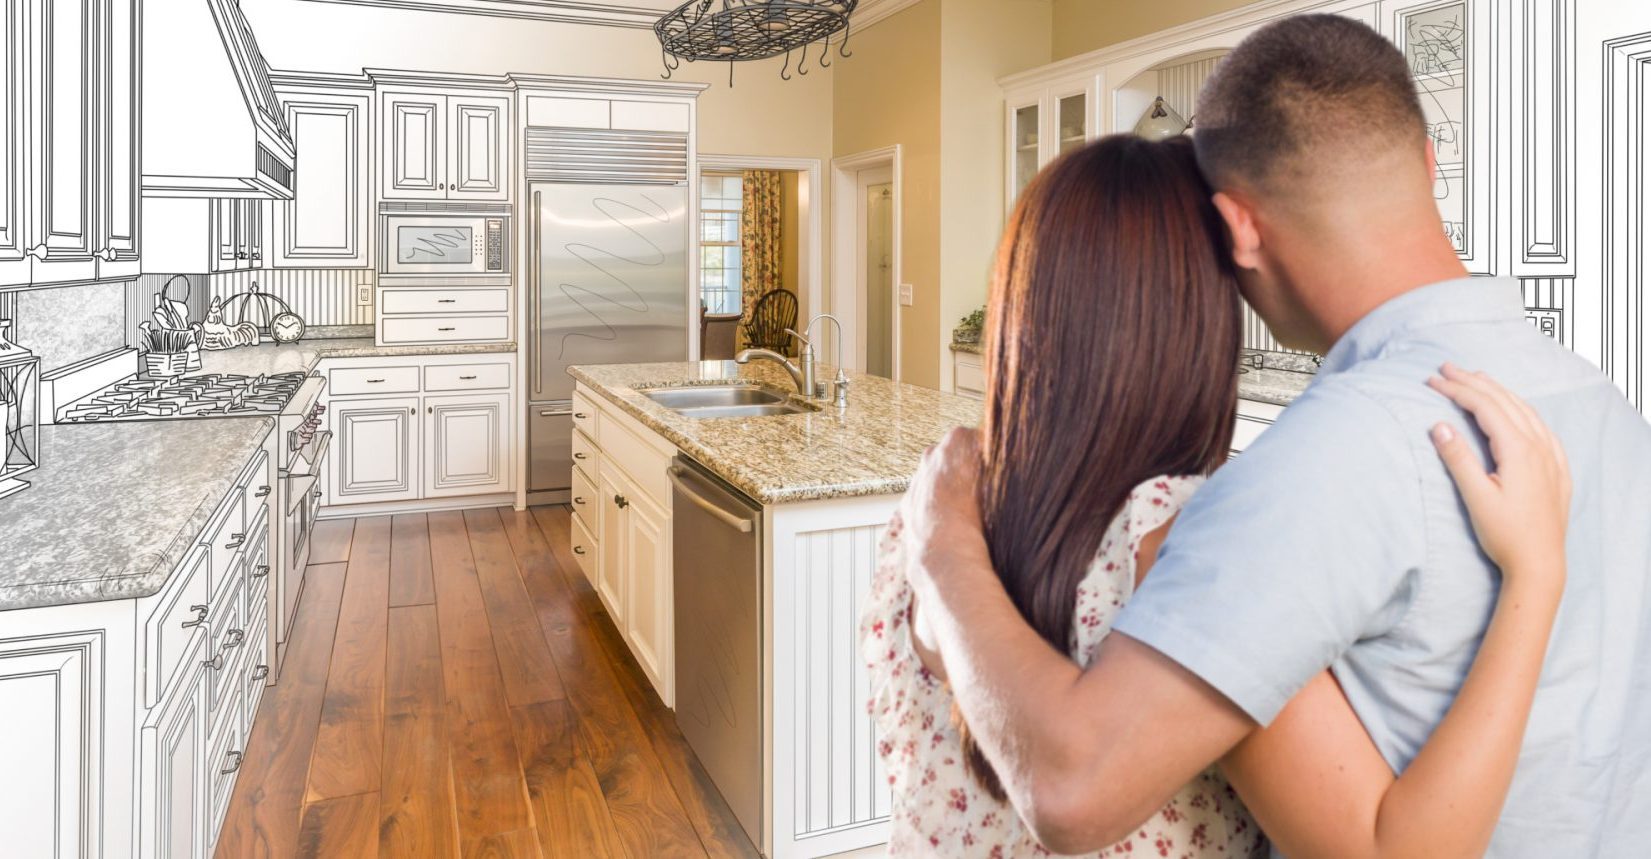 Back of the couple standing together looking into their kitchen. Left and right of room are illustrated renovation design plans.